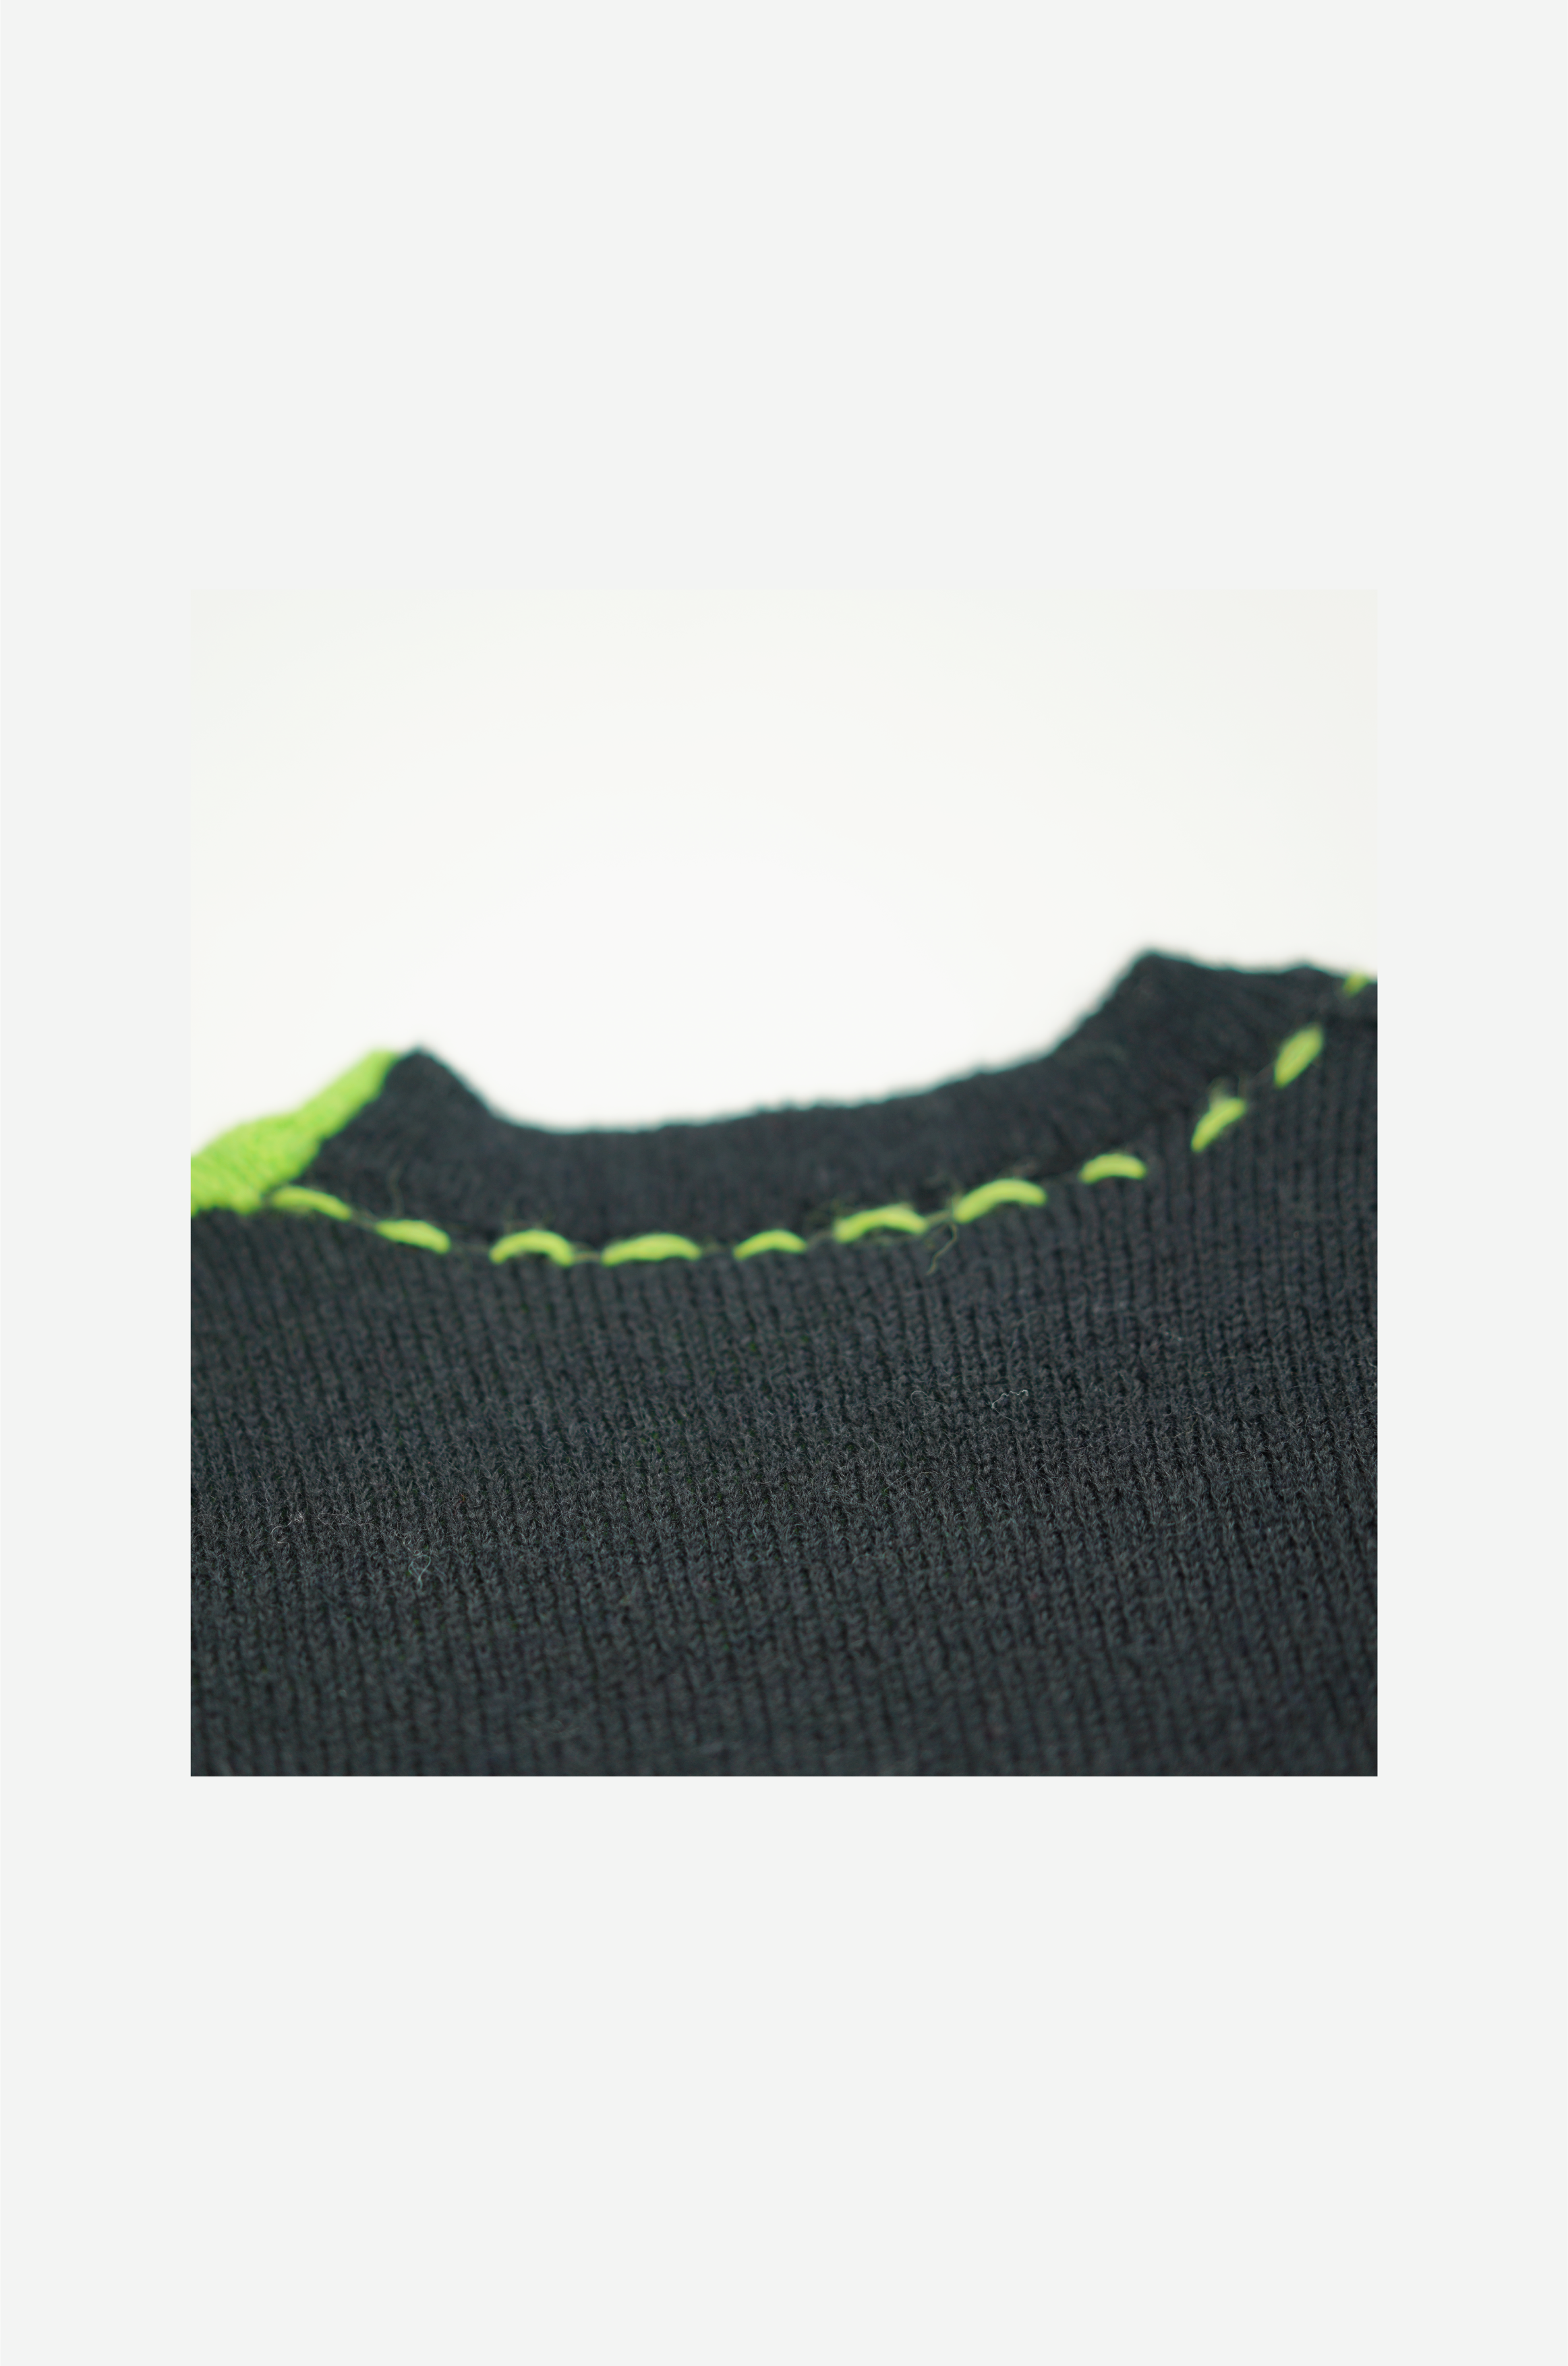 Patchwork Green Knit